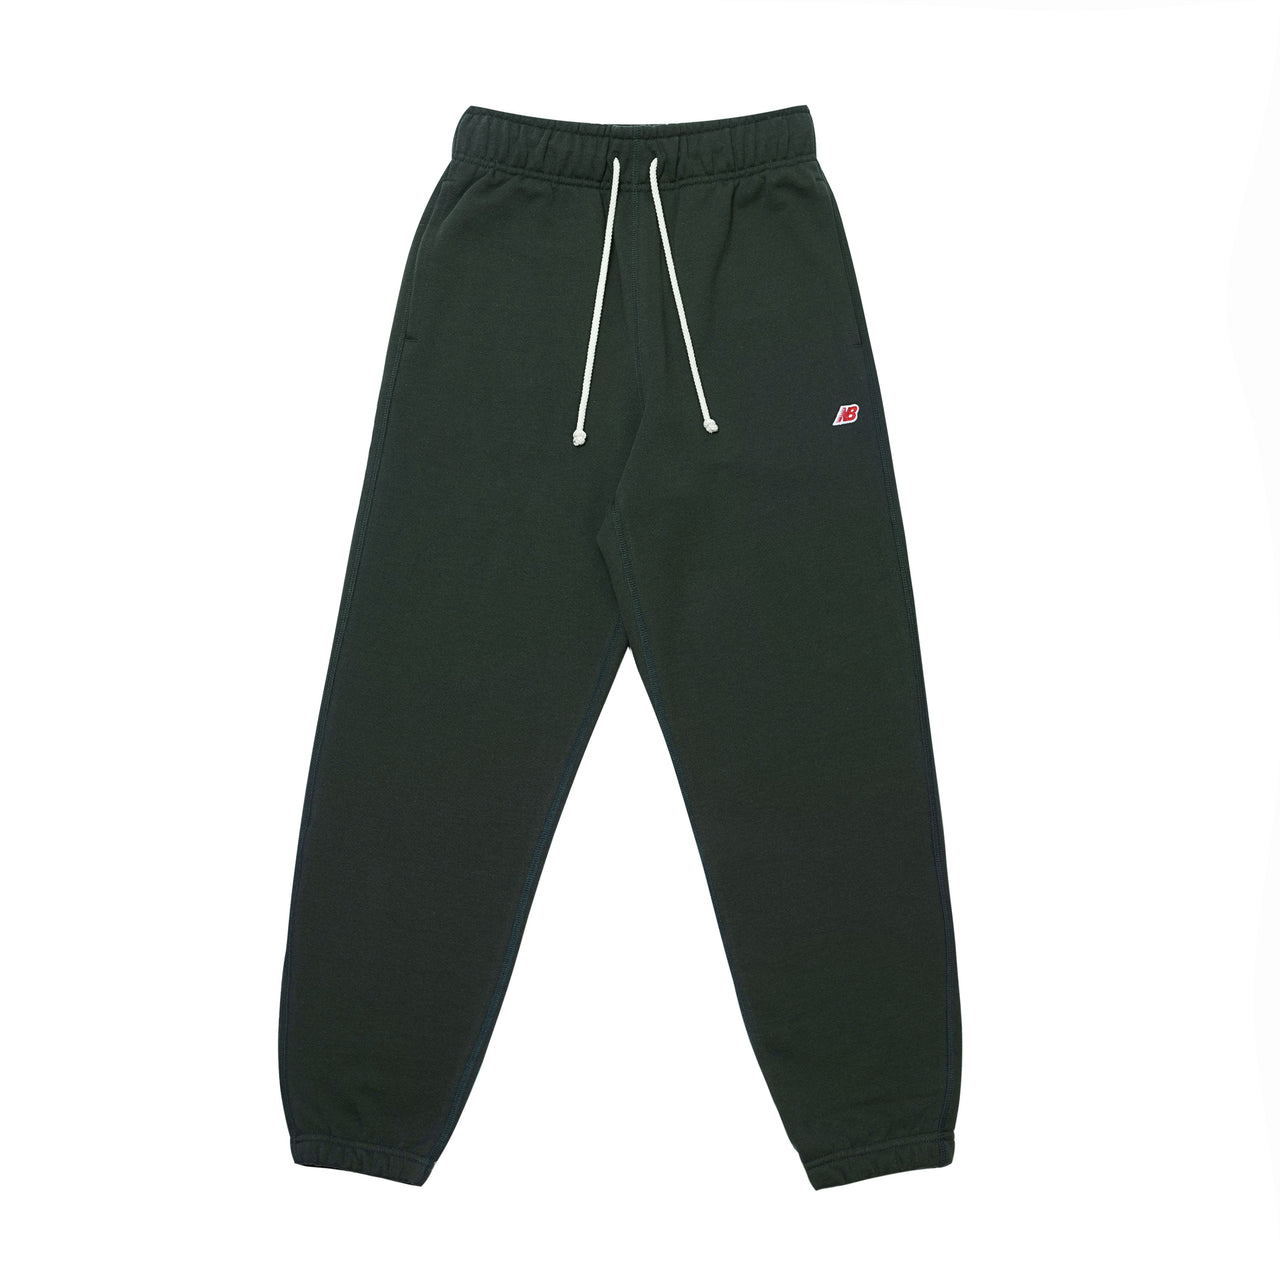 MADE IN USA CORE SWEATPANTS